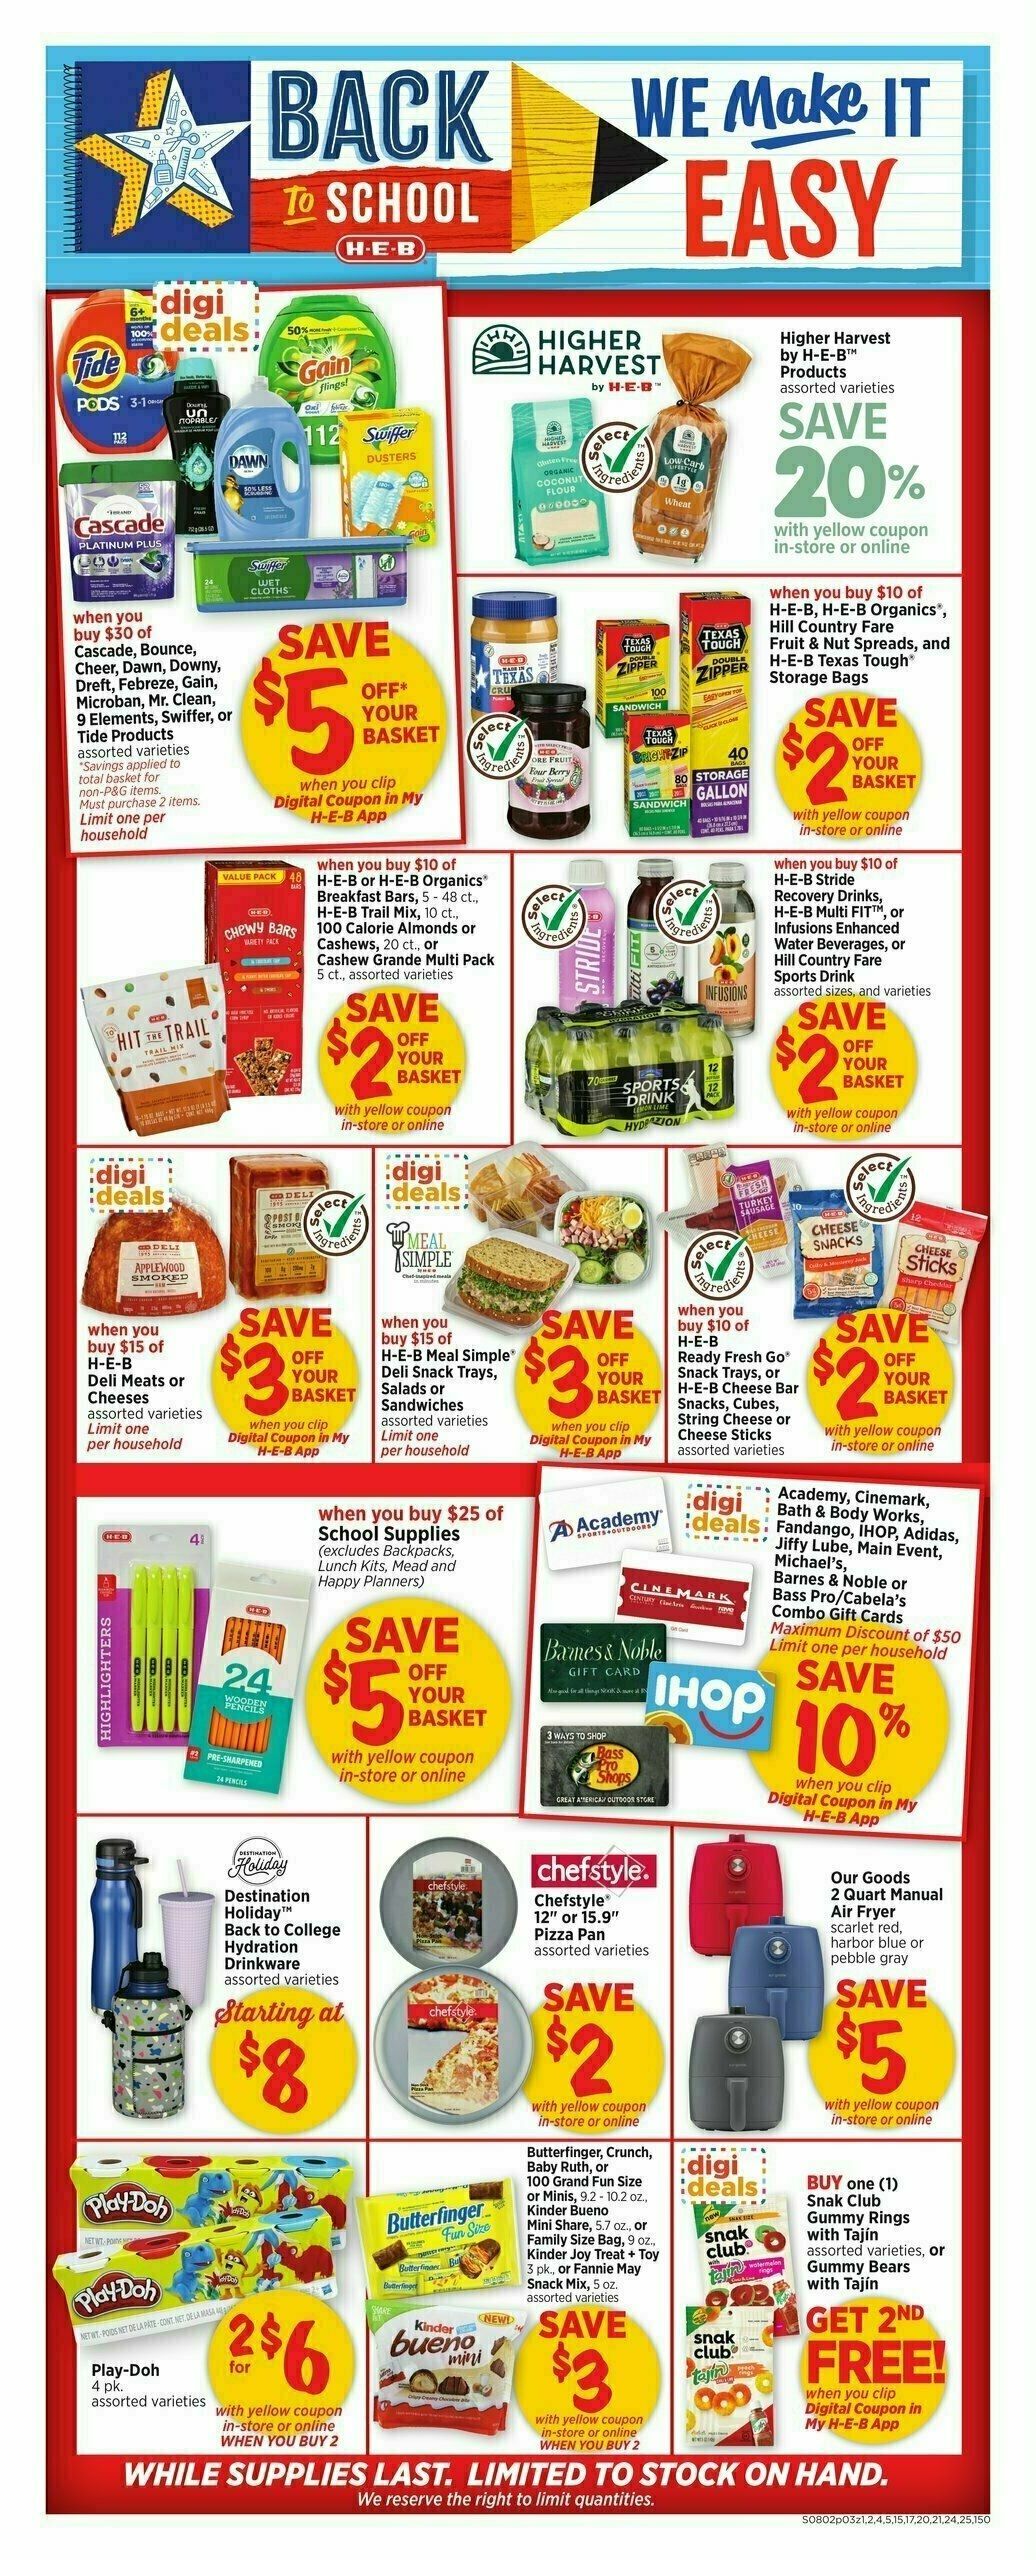 H-E-B Weekly Ad from August 2